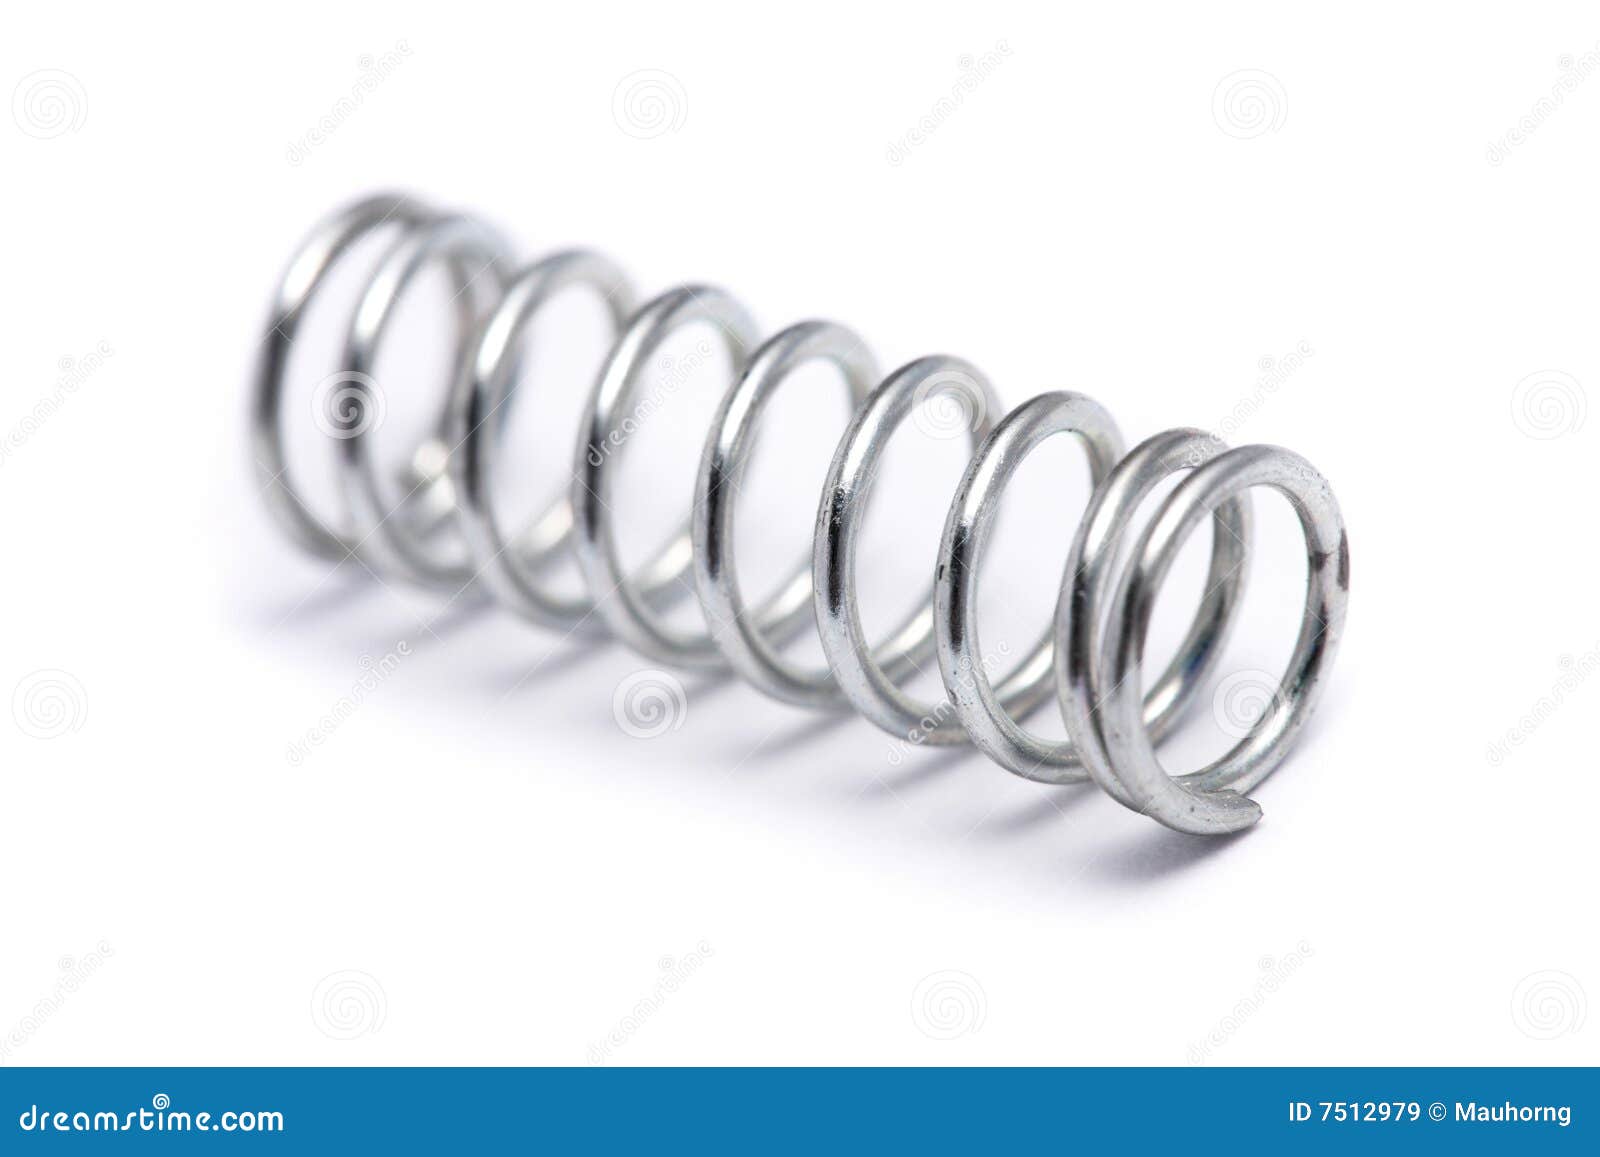 clipart coil spring - photo #44